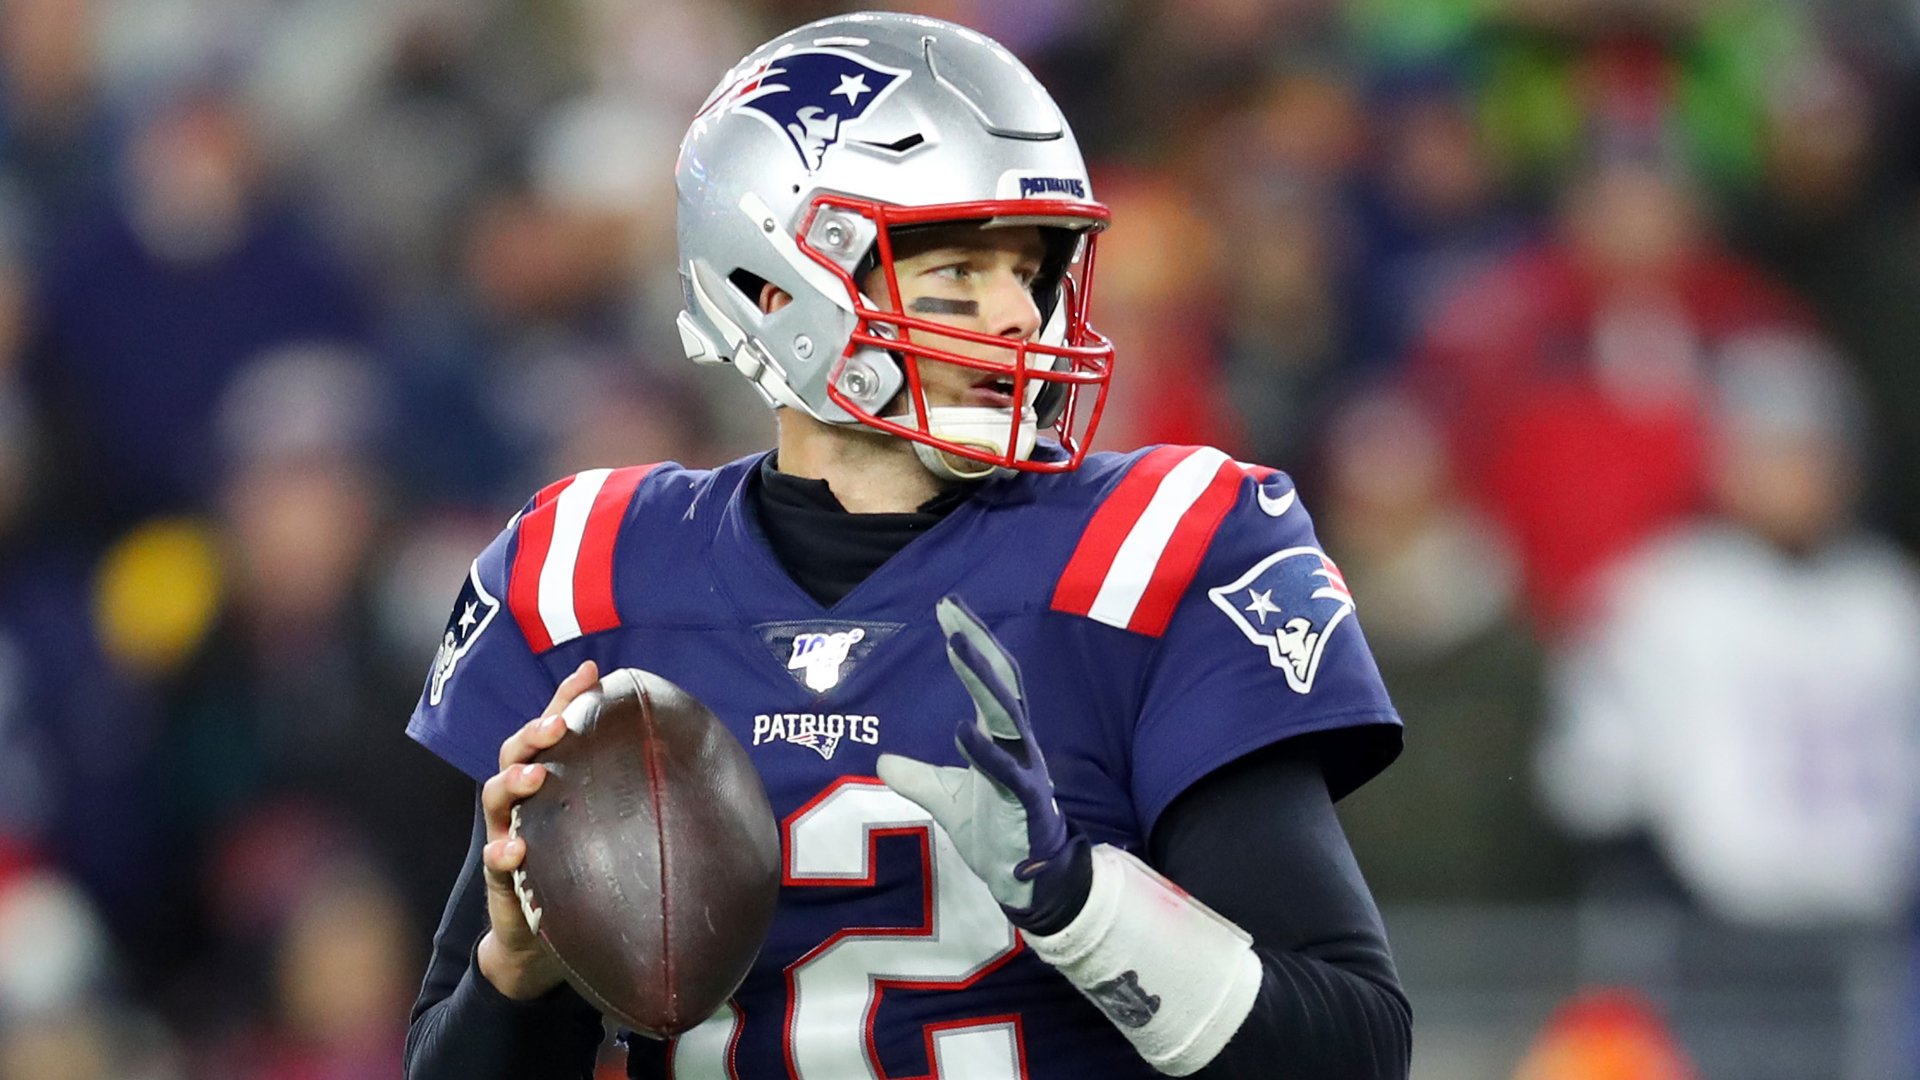 https://images.daznservices.com/di/library/omnisport/1a/cb/tombrady-cropped_1qdnffhvy1rhh15qy50uqqictc.jpg?t=-386241842&w=%7Bwidth%7D&quality=80